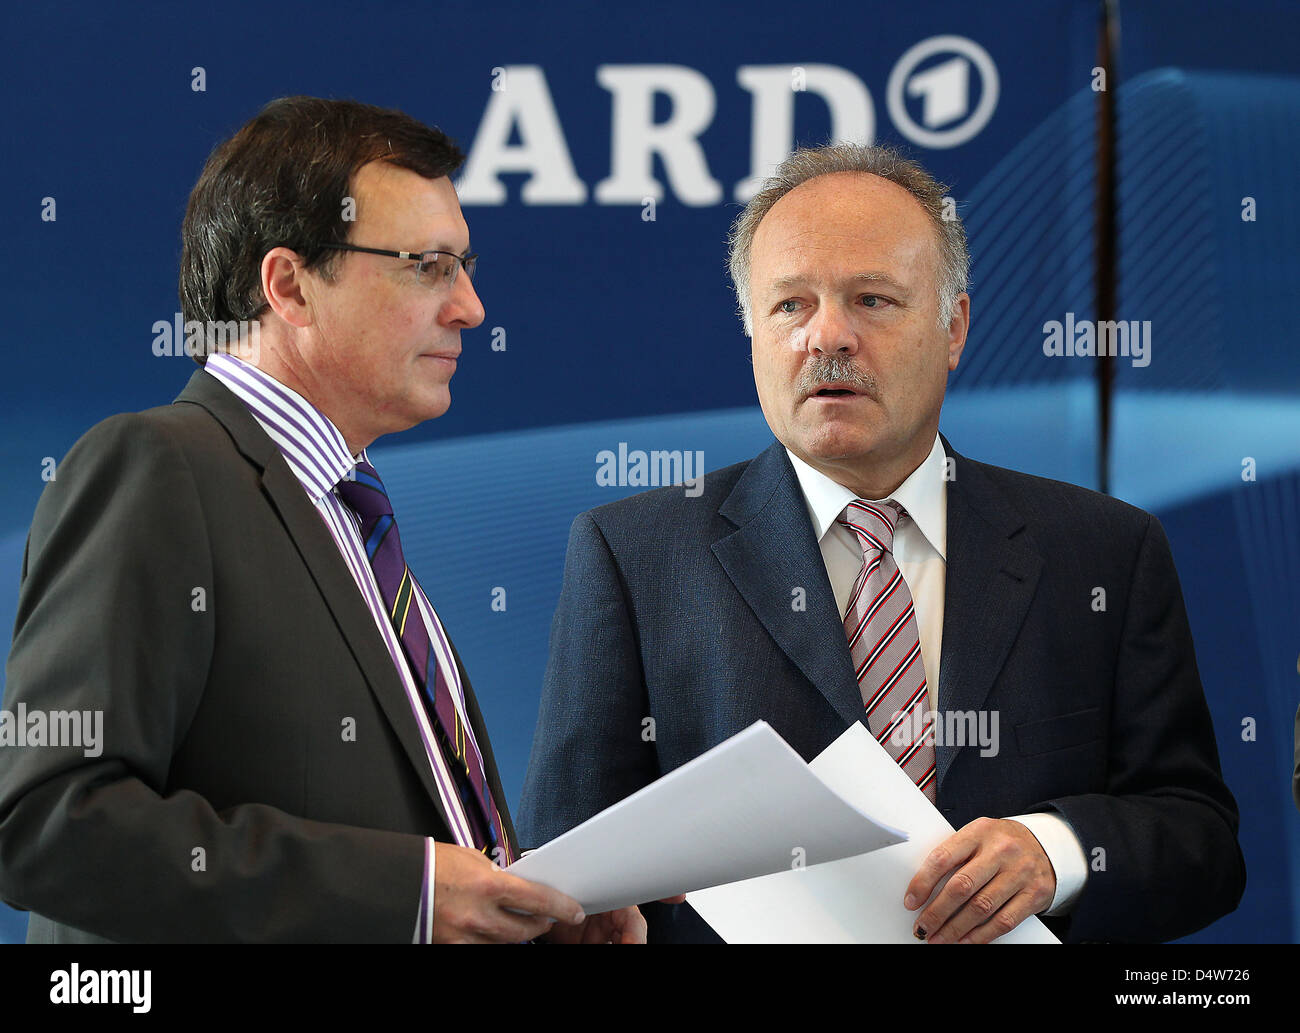 Chairman of broadcaster ARD, Peter Boudgoust, talks to the director of ...